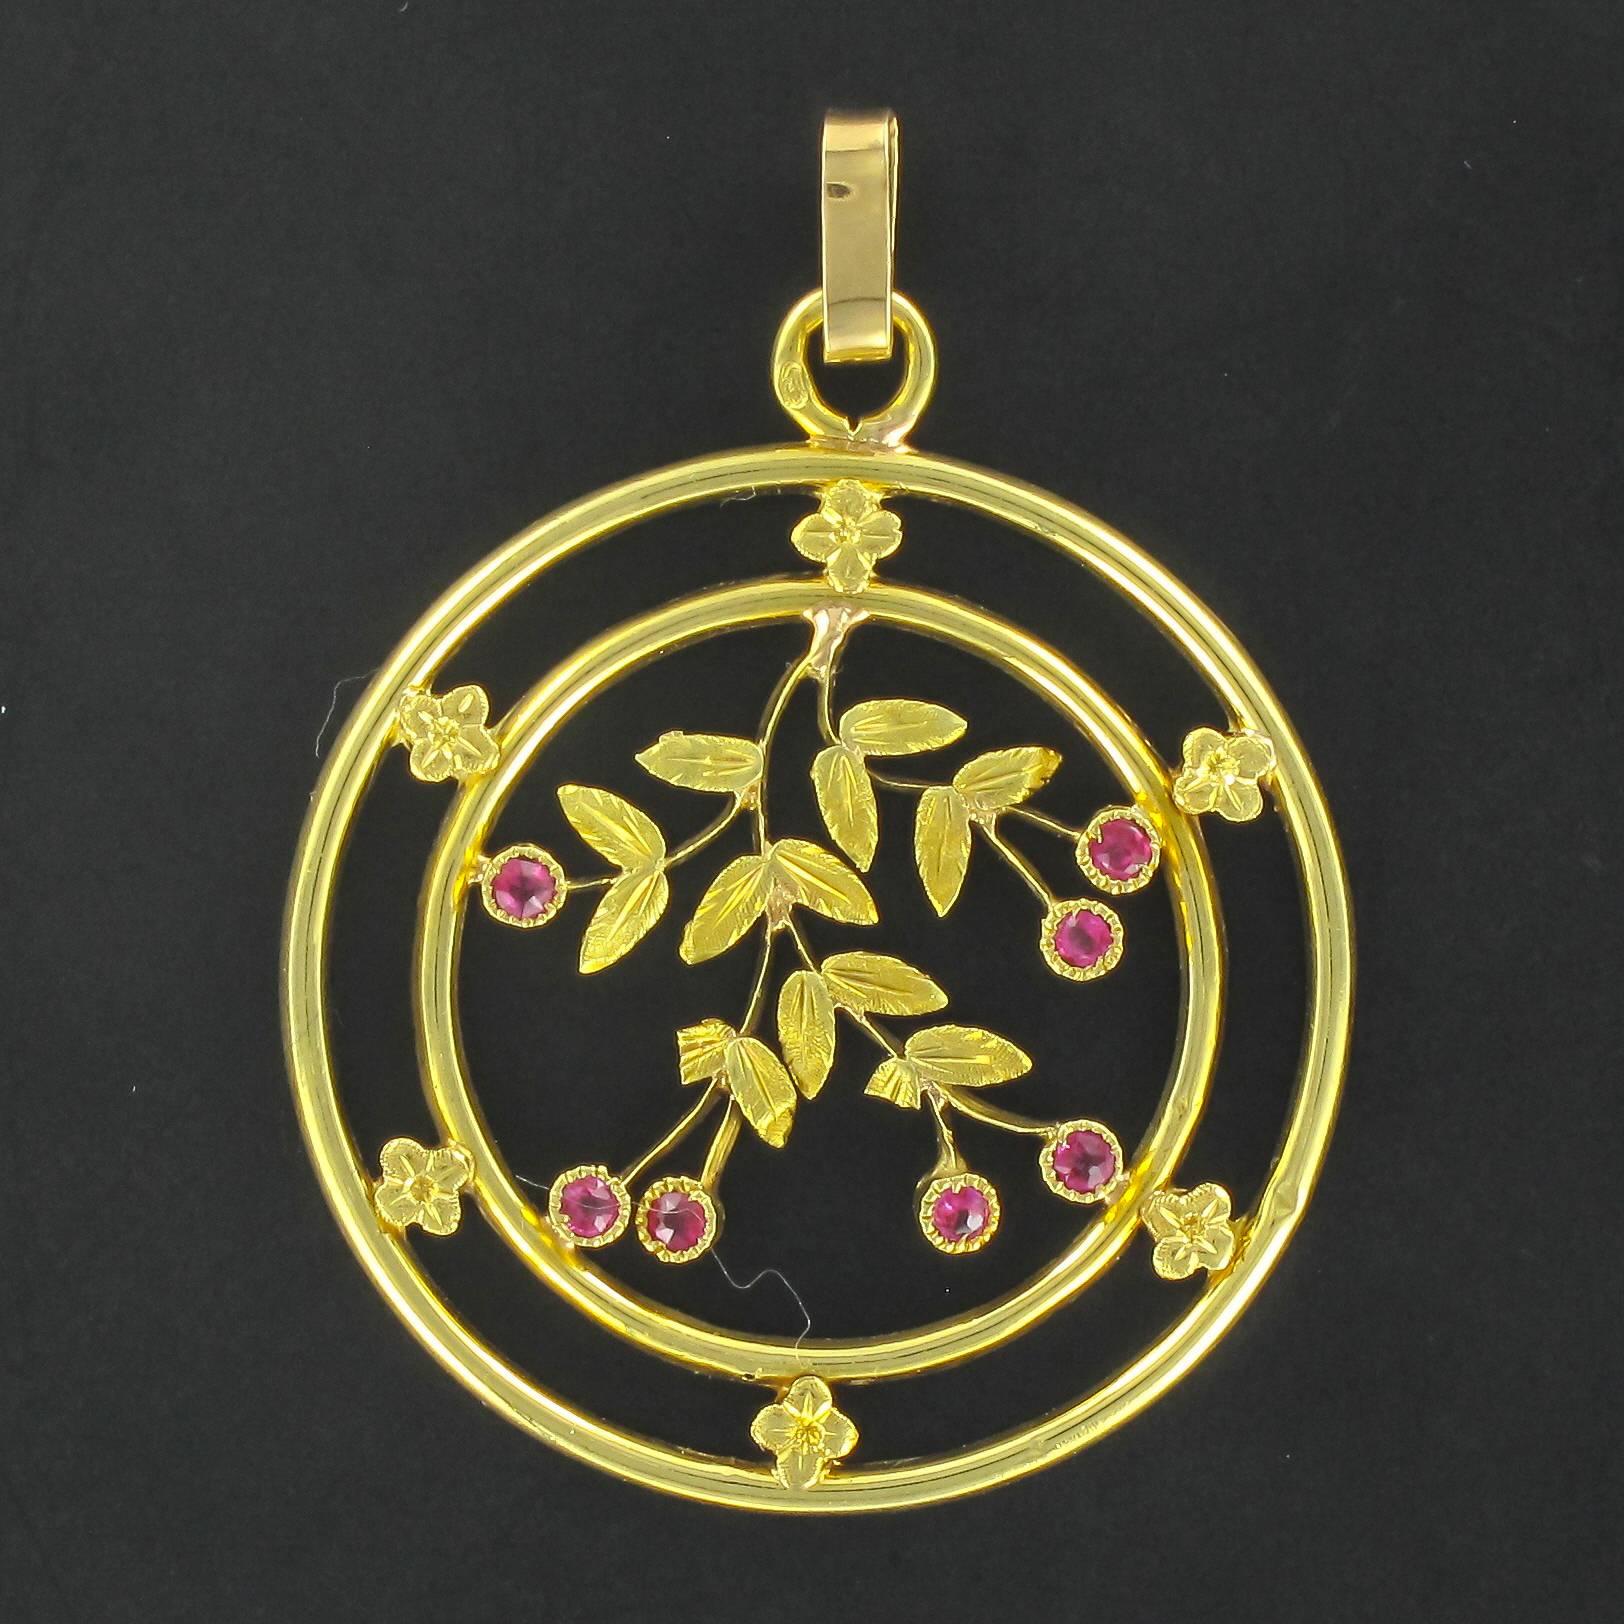 Pendant in 18 carat yellow gold, eagle head hallmark. 
This magnificent antique pendant necklace is composed of gold strands connected by small flower motifs. At the centre is an engraved leafy design that is beaded and bezel set with small round